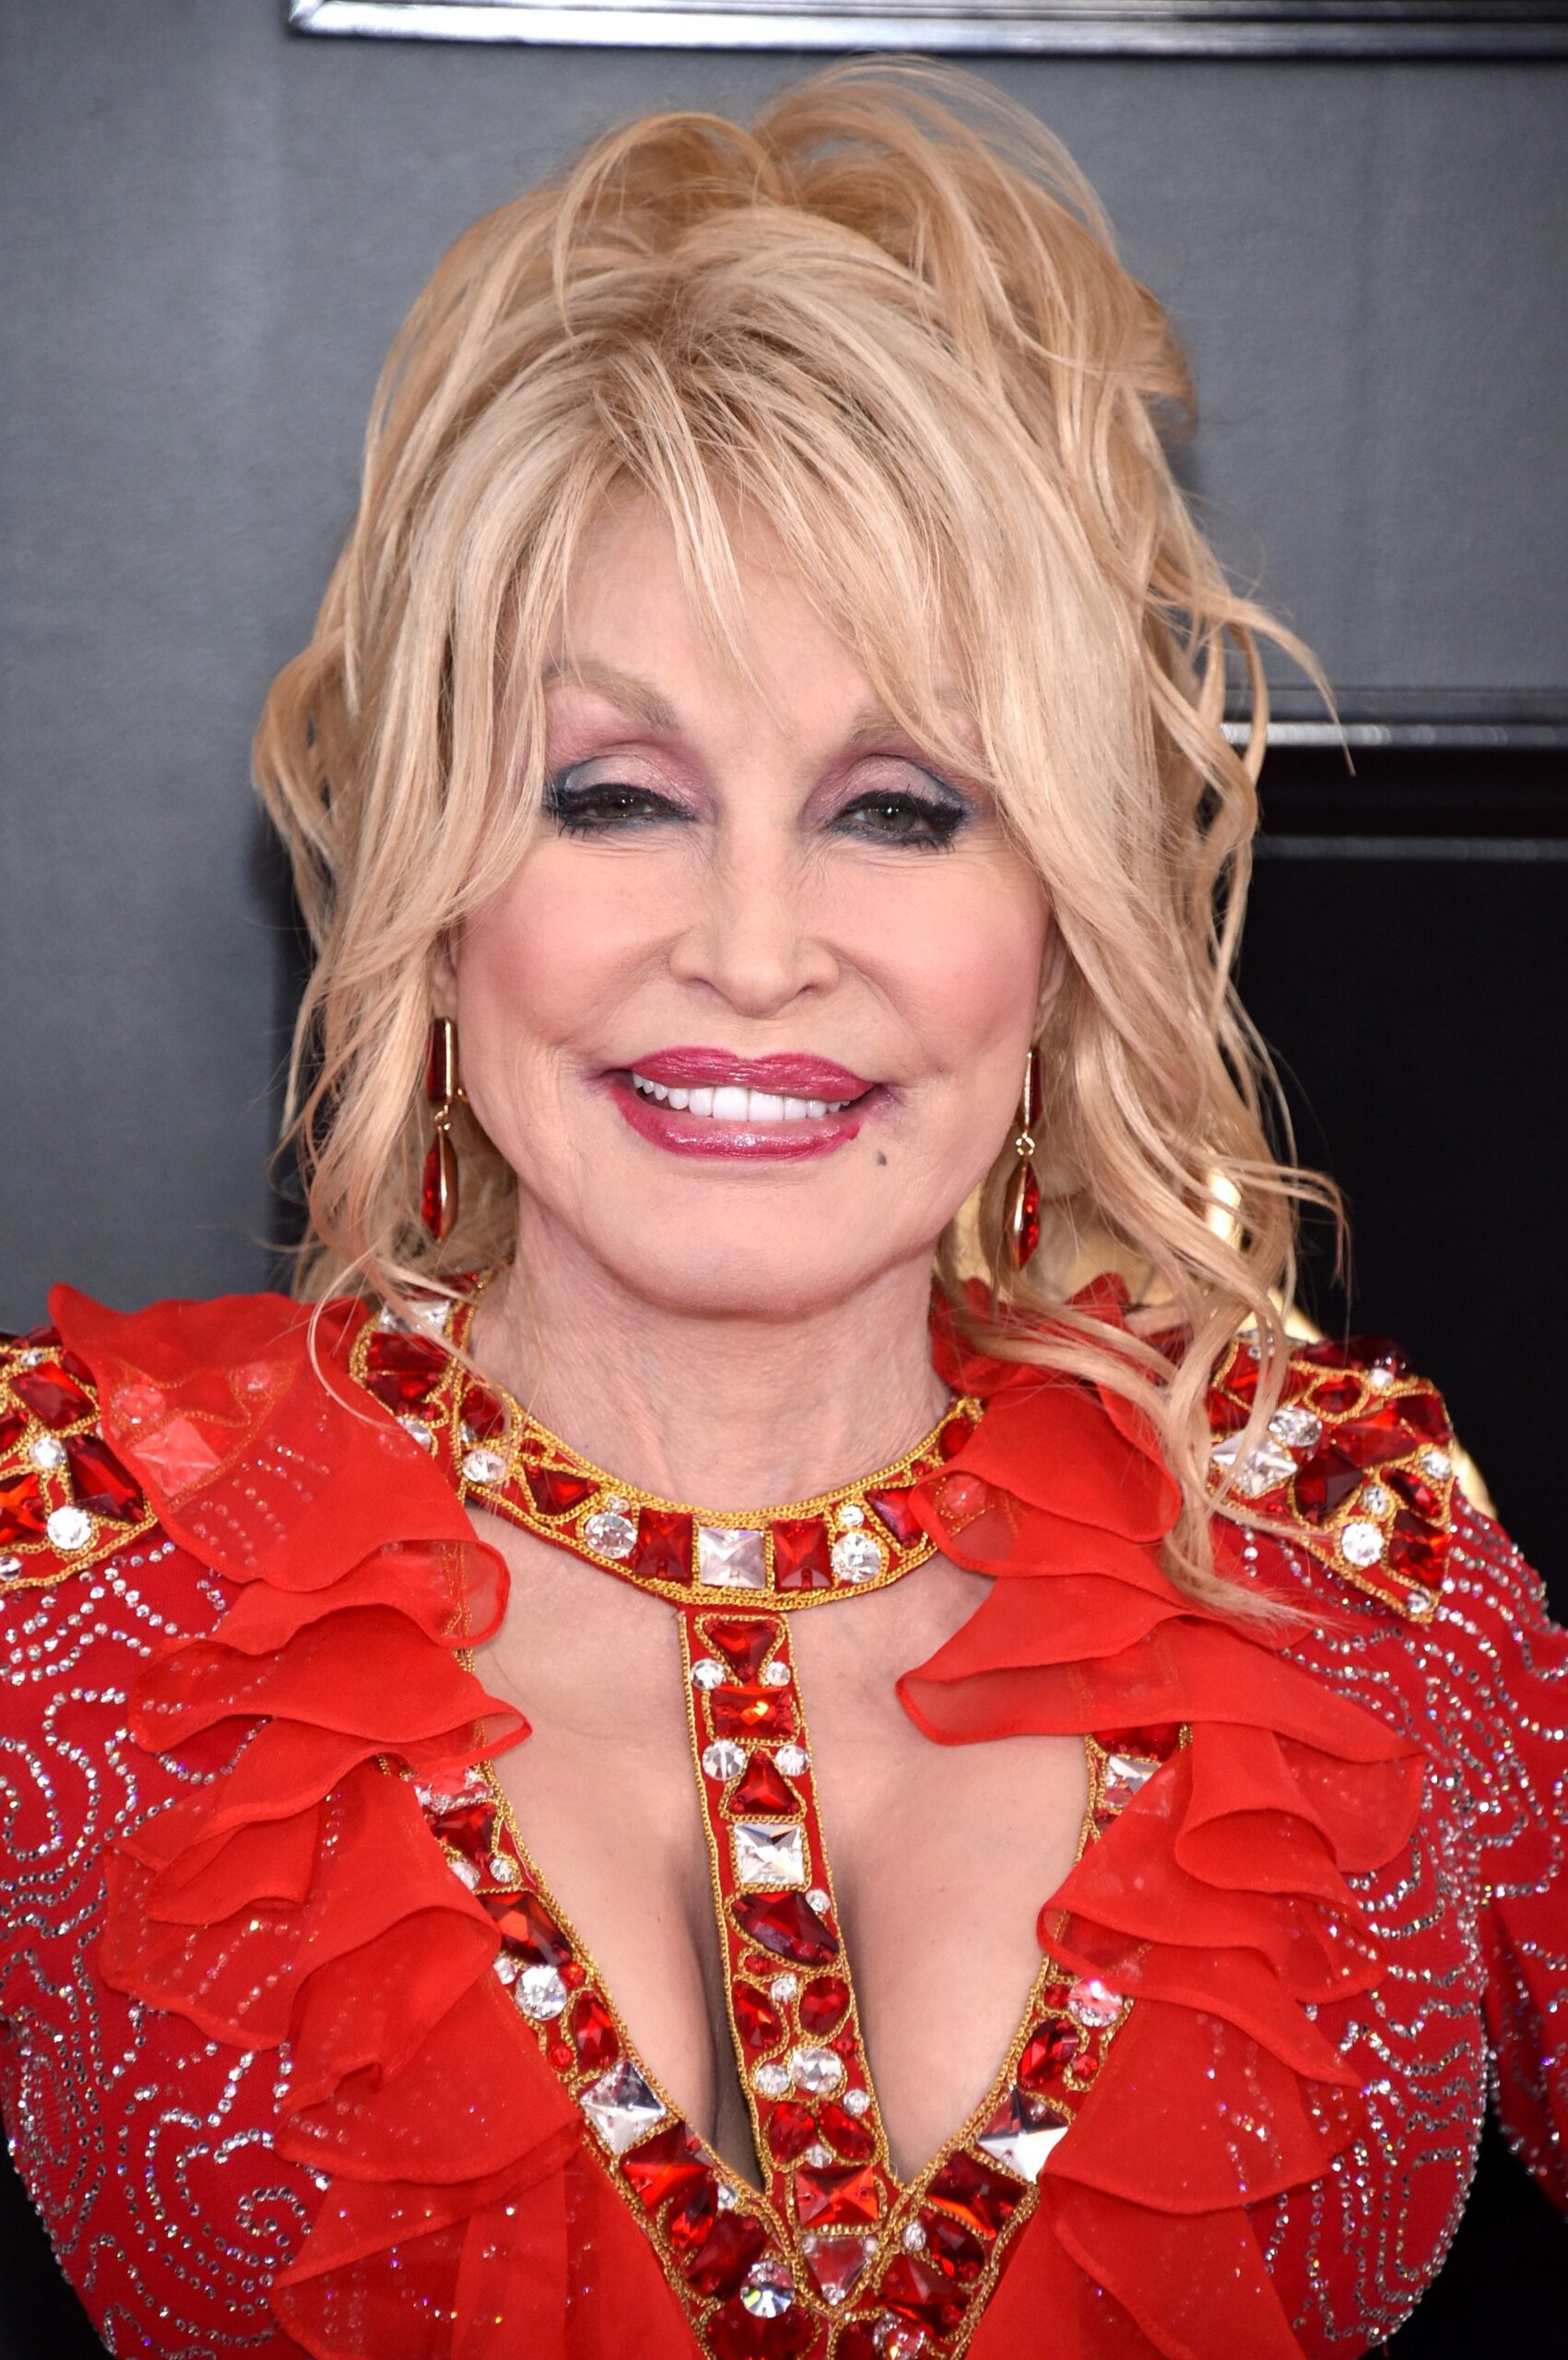 Dolly Parton’s Beauty Secret: How She Stays Glamorous at 77 - TRUTHS